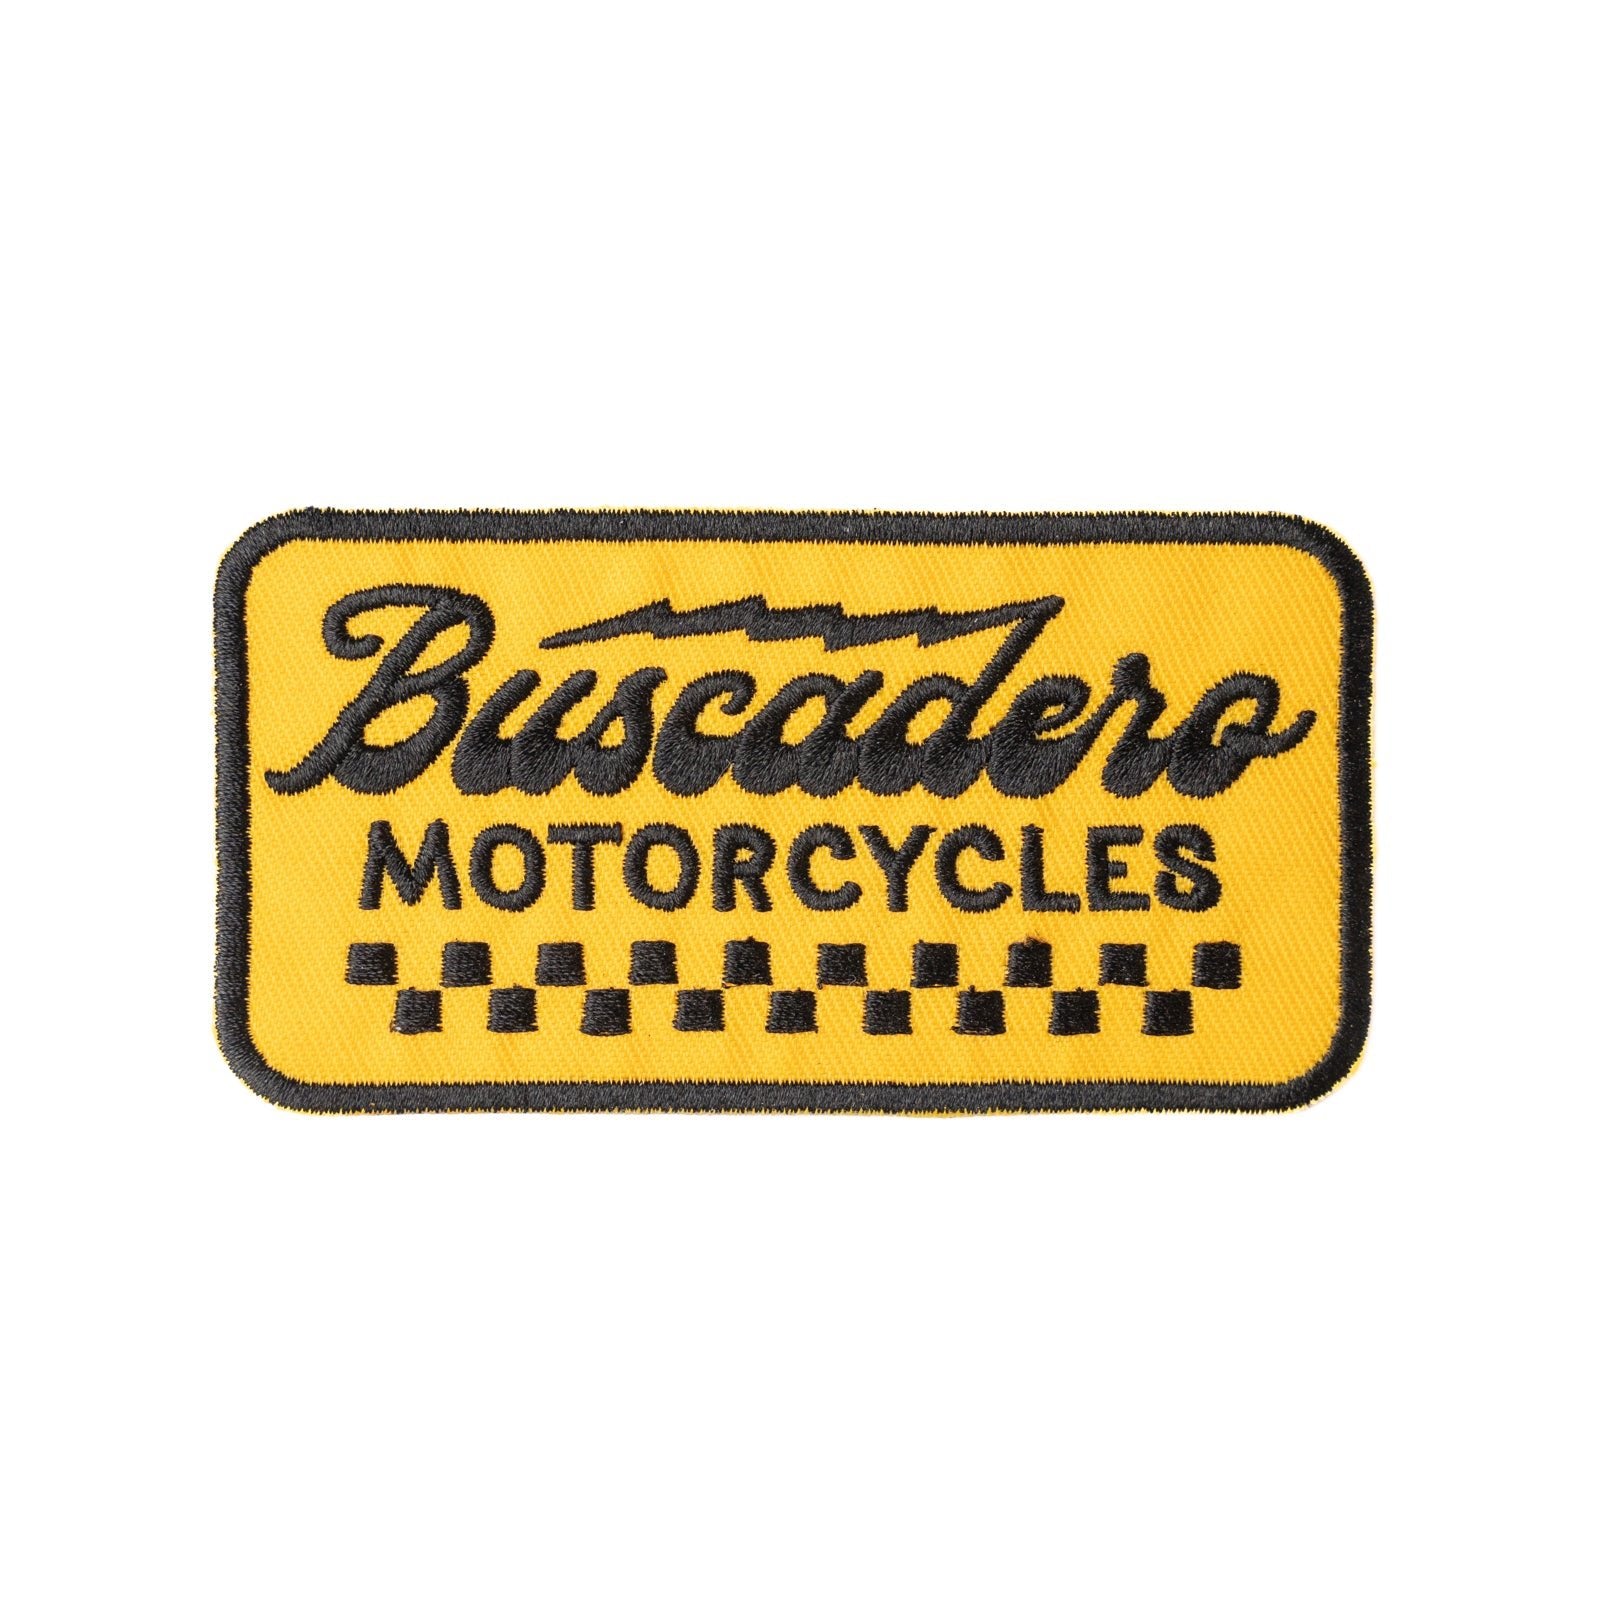 'Banner' Iron-on Patch - Buscadero Motorcycles